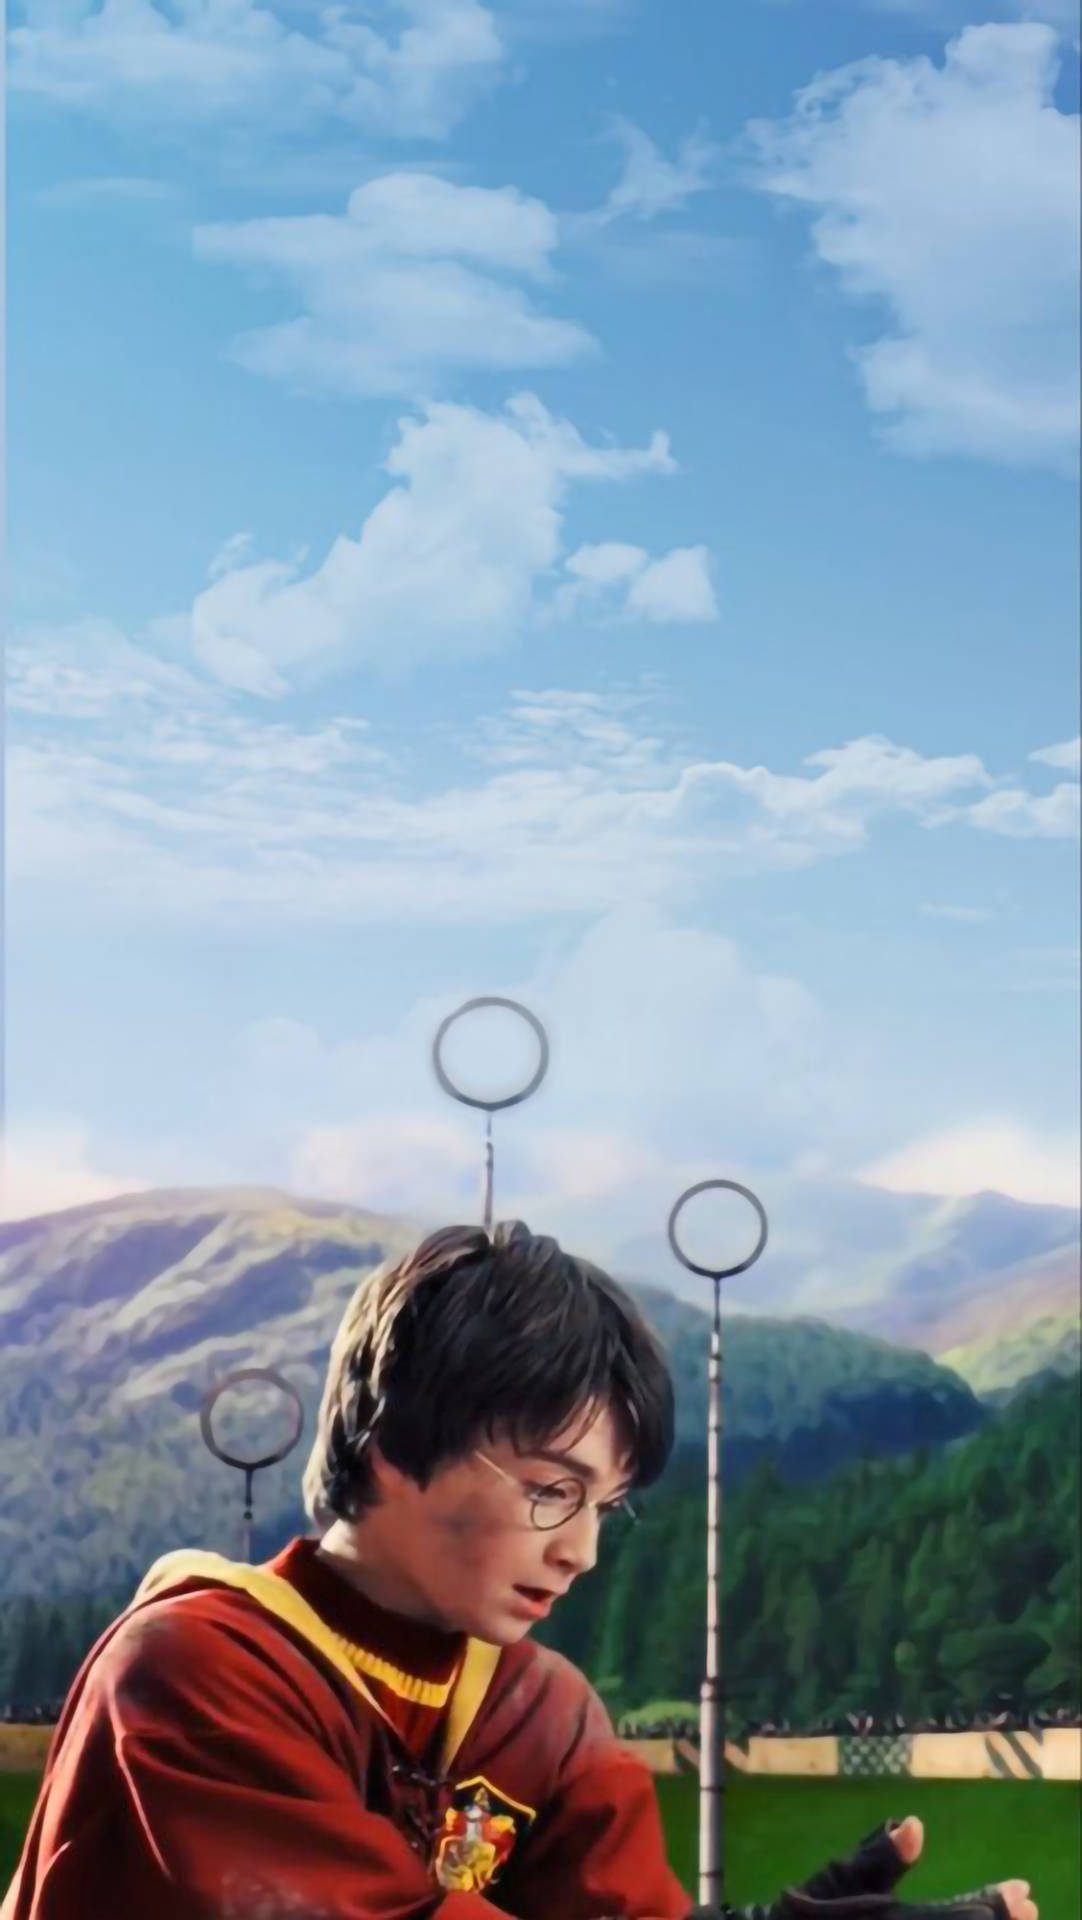 Aesthetic Harry Potter Quidditch Player Background